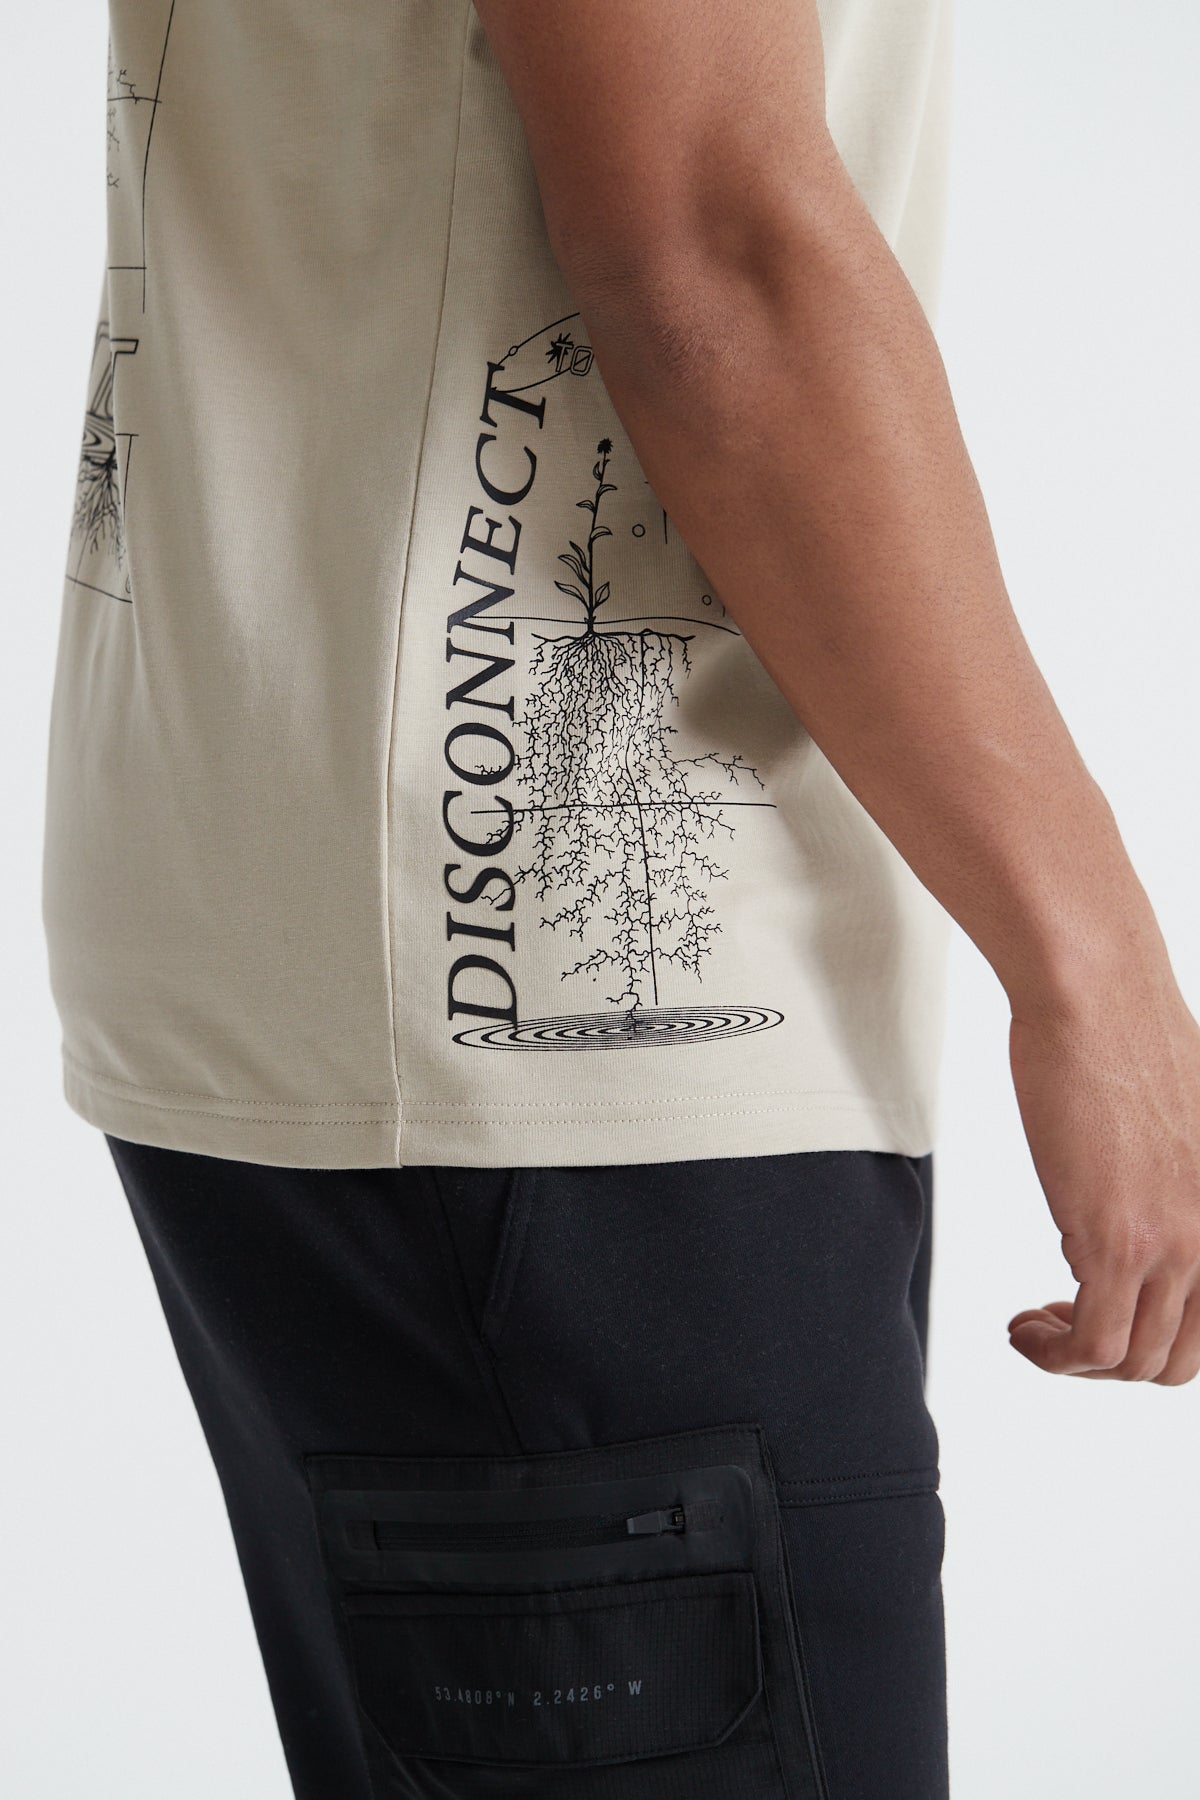 Disconnect to Reconnect T-shirt - Sand Stone